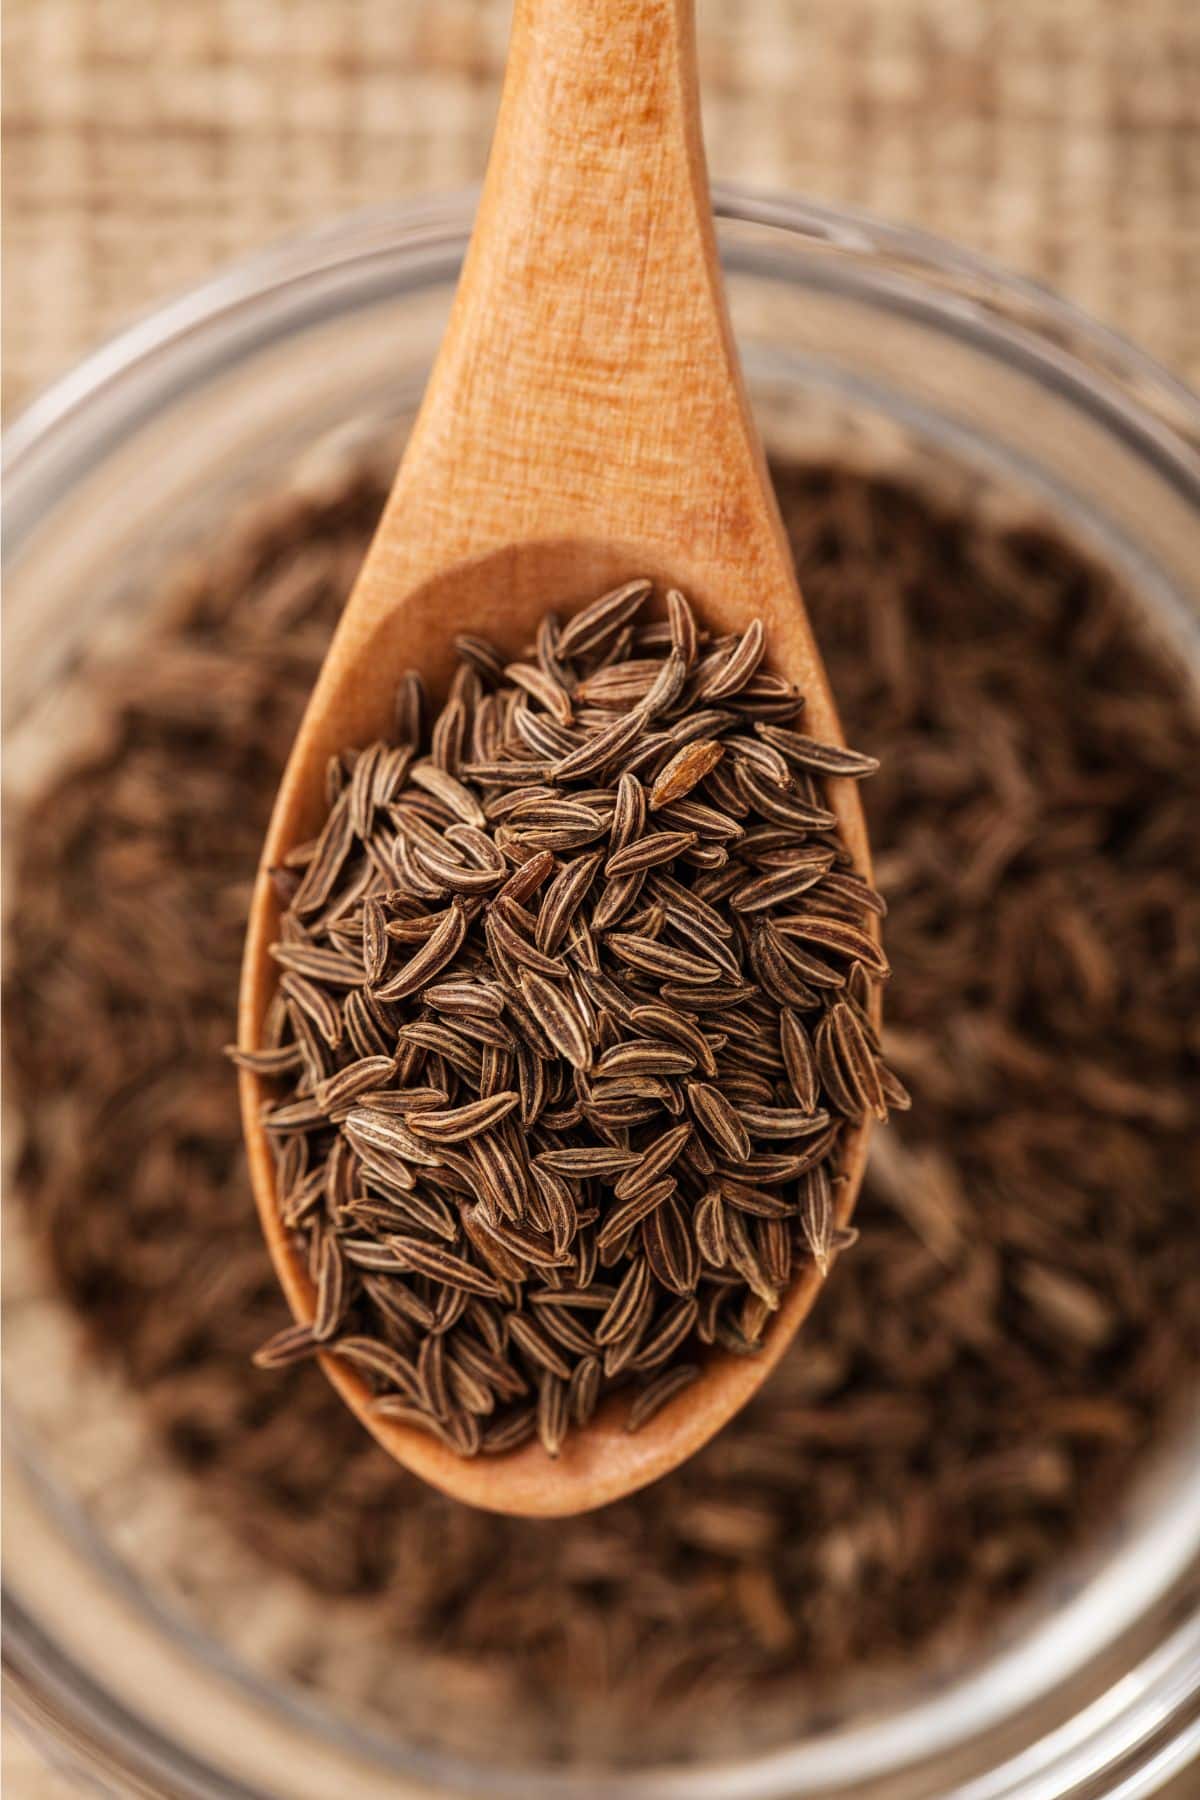 Scoopful of cumin seeds over bowl of caraway.